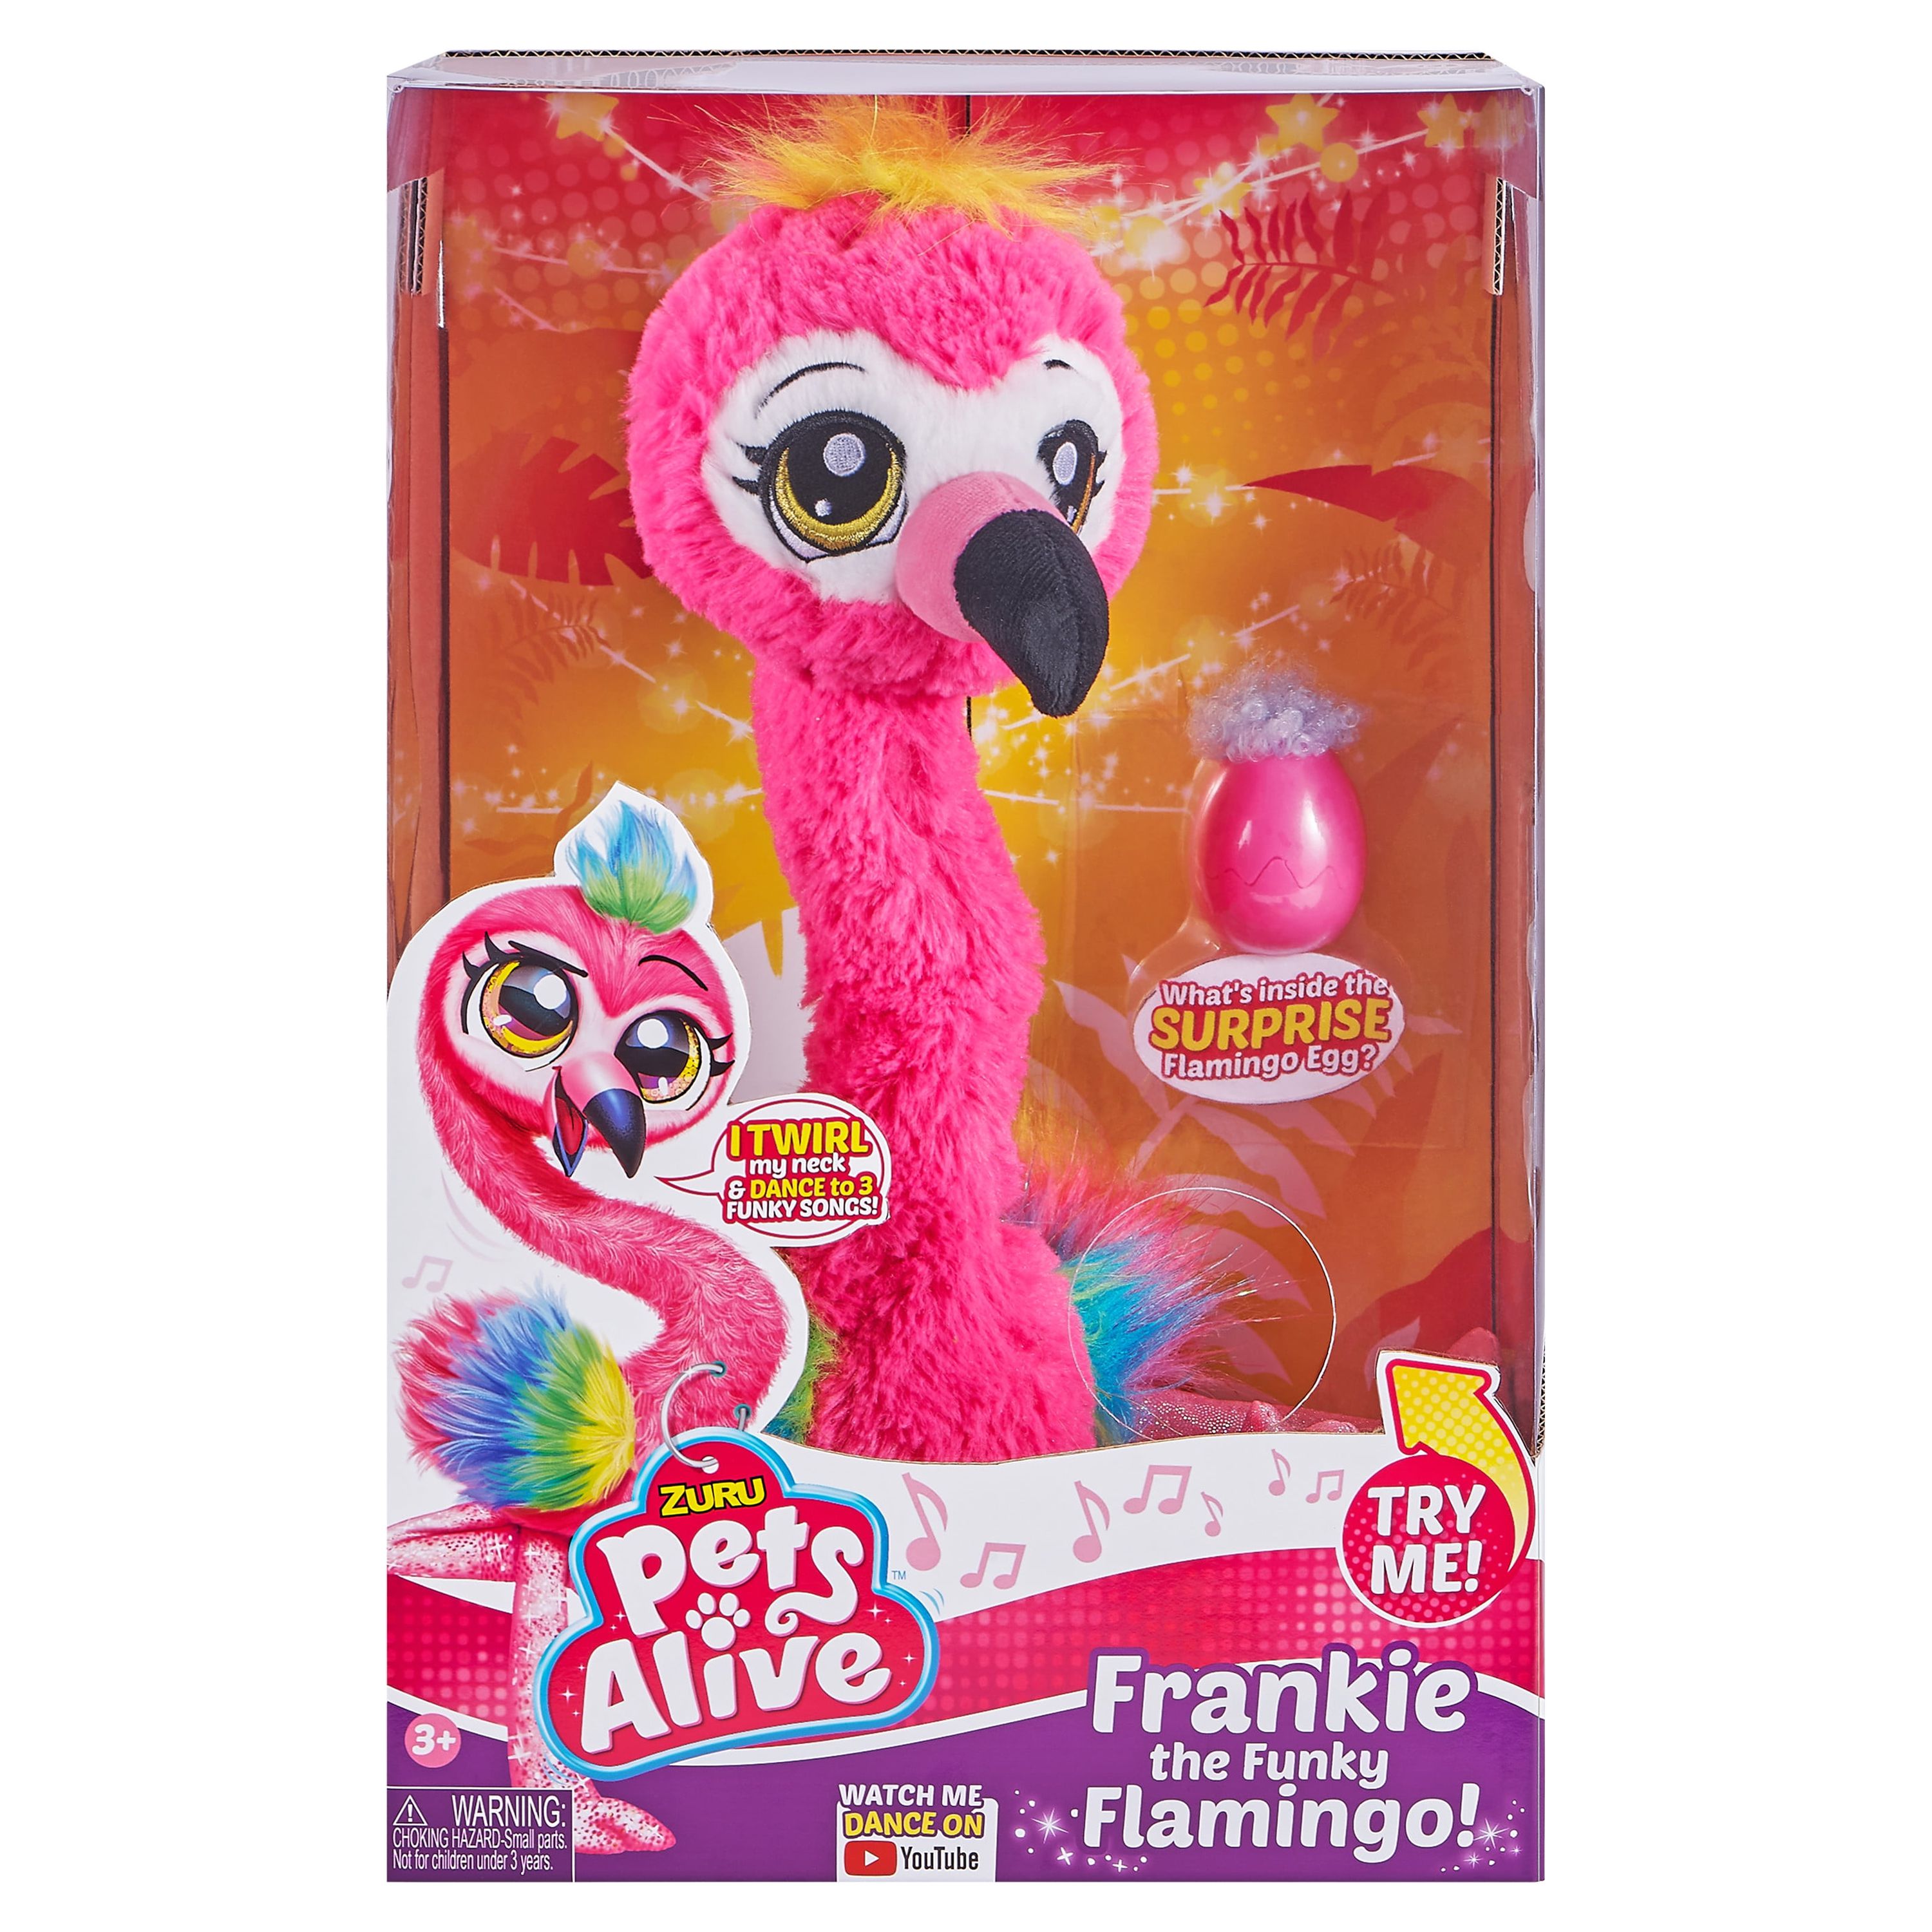 Pets Alive Frankie the Funky Flamingo Battery-Powered dancing Robotic Toy by ZURU - image 1 of 10